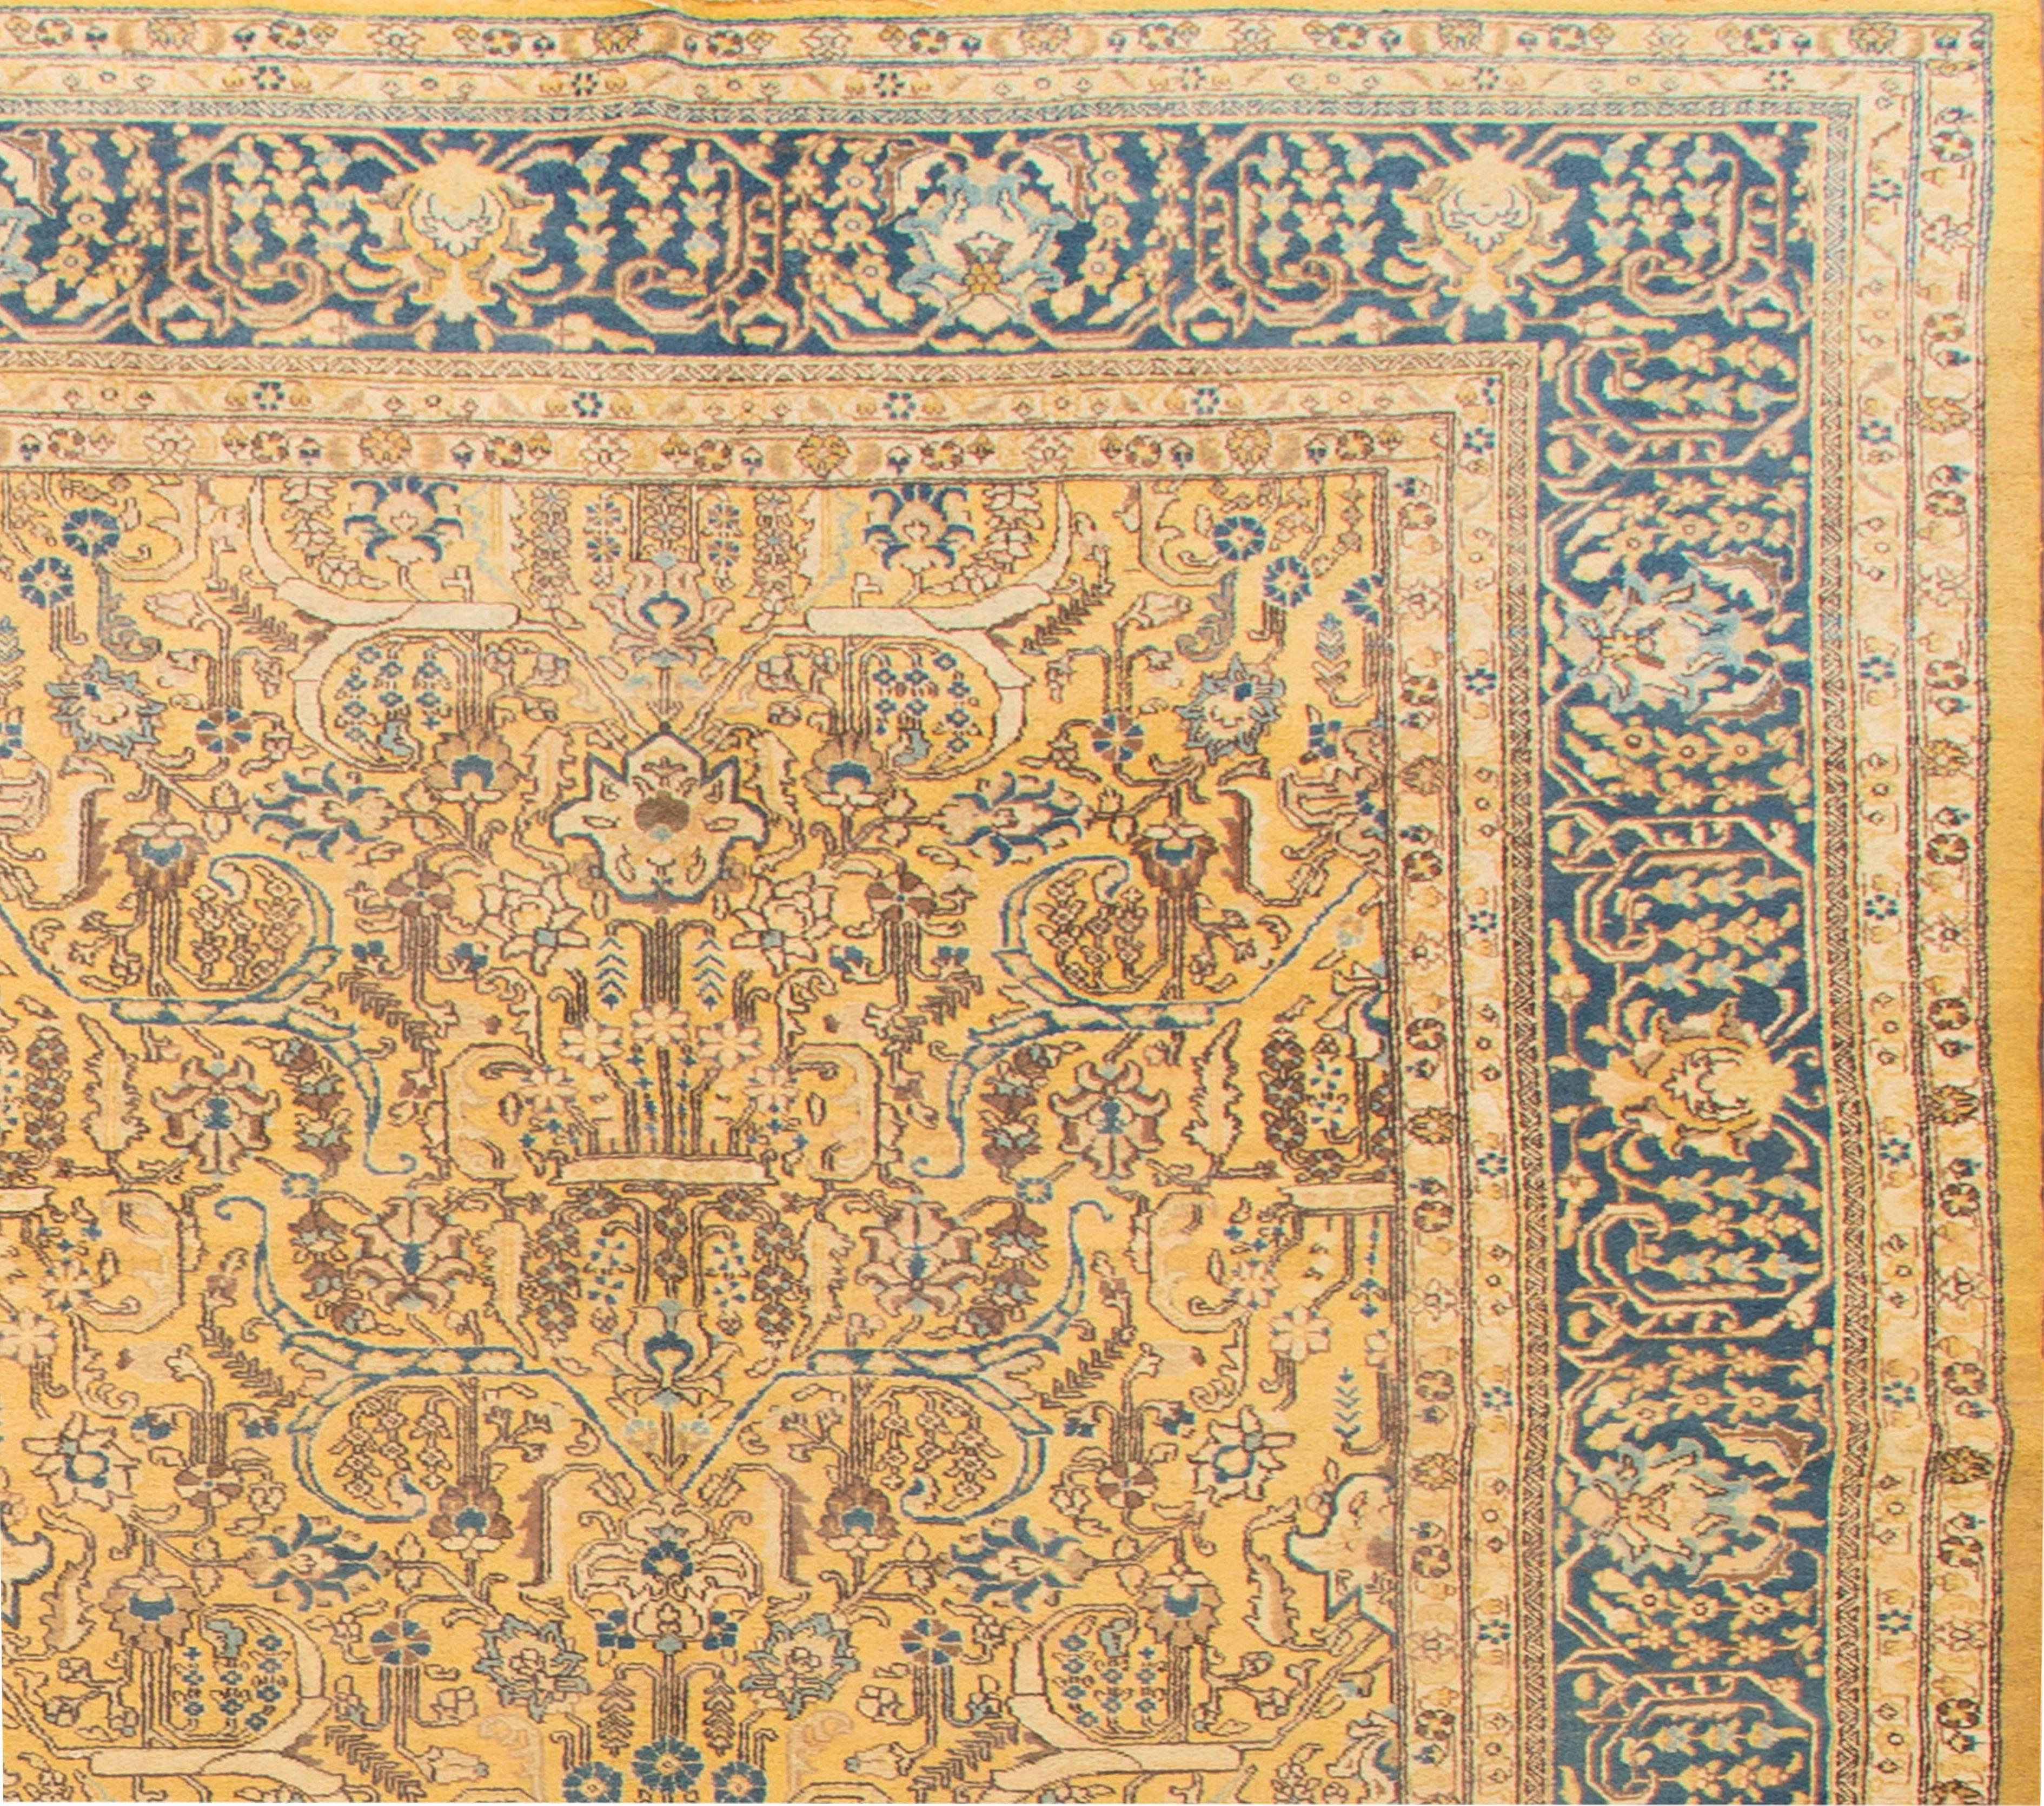 Antique Tabriz Persian carpet, yellow field with blue and earth tone floral accents. Measures: 12 x 16.10.